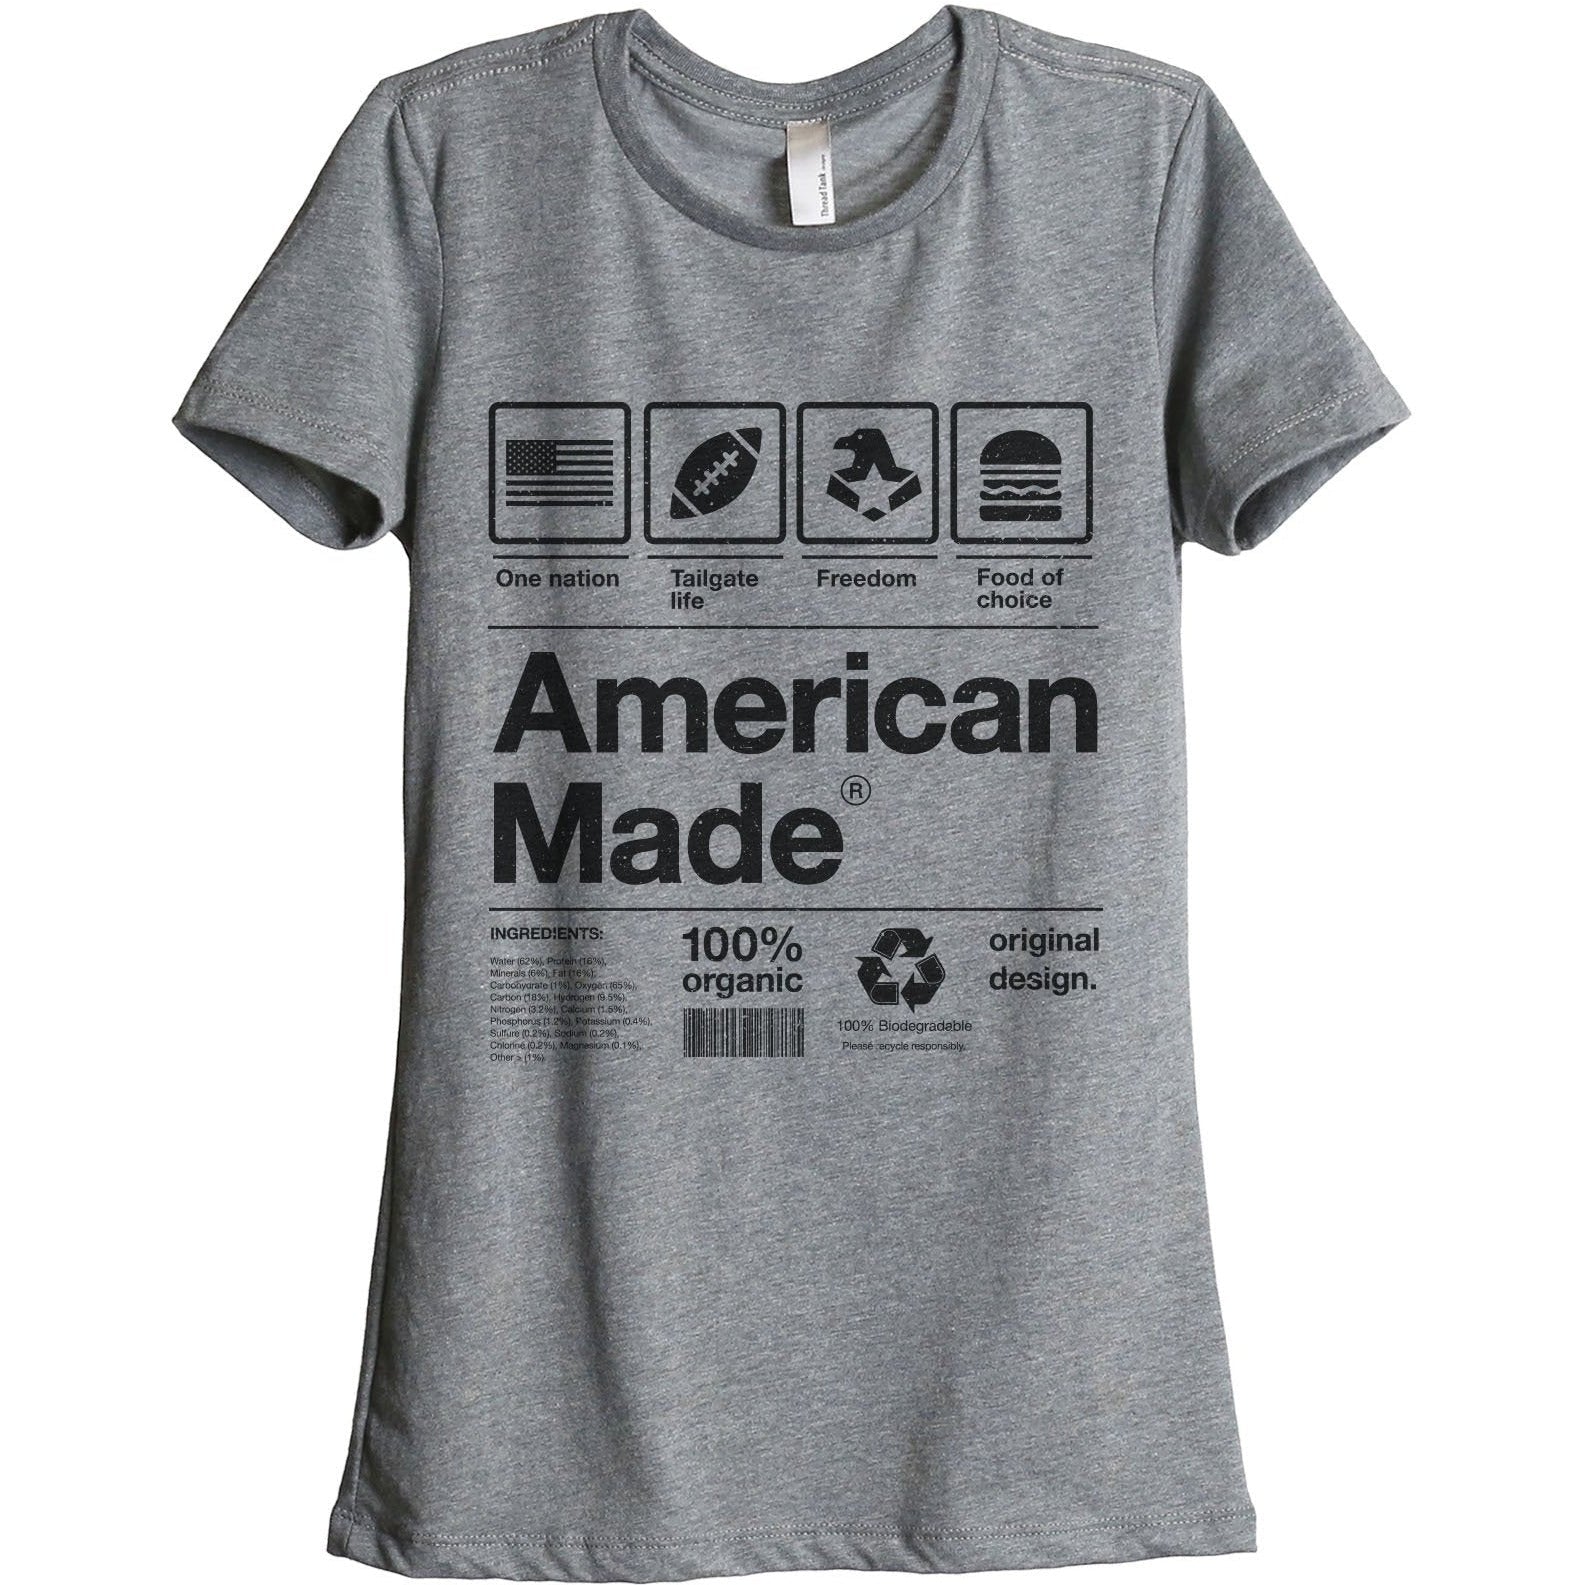 American Made - Stories You Can Wear